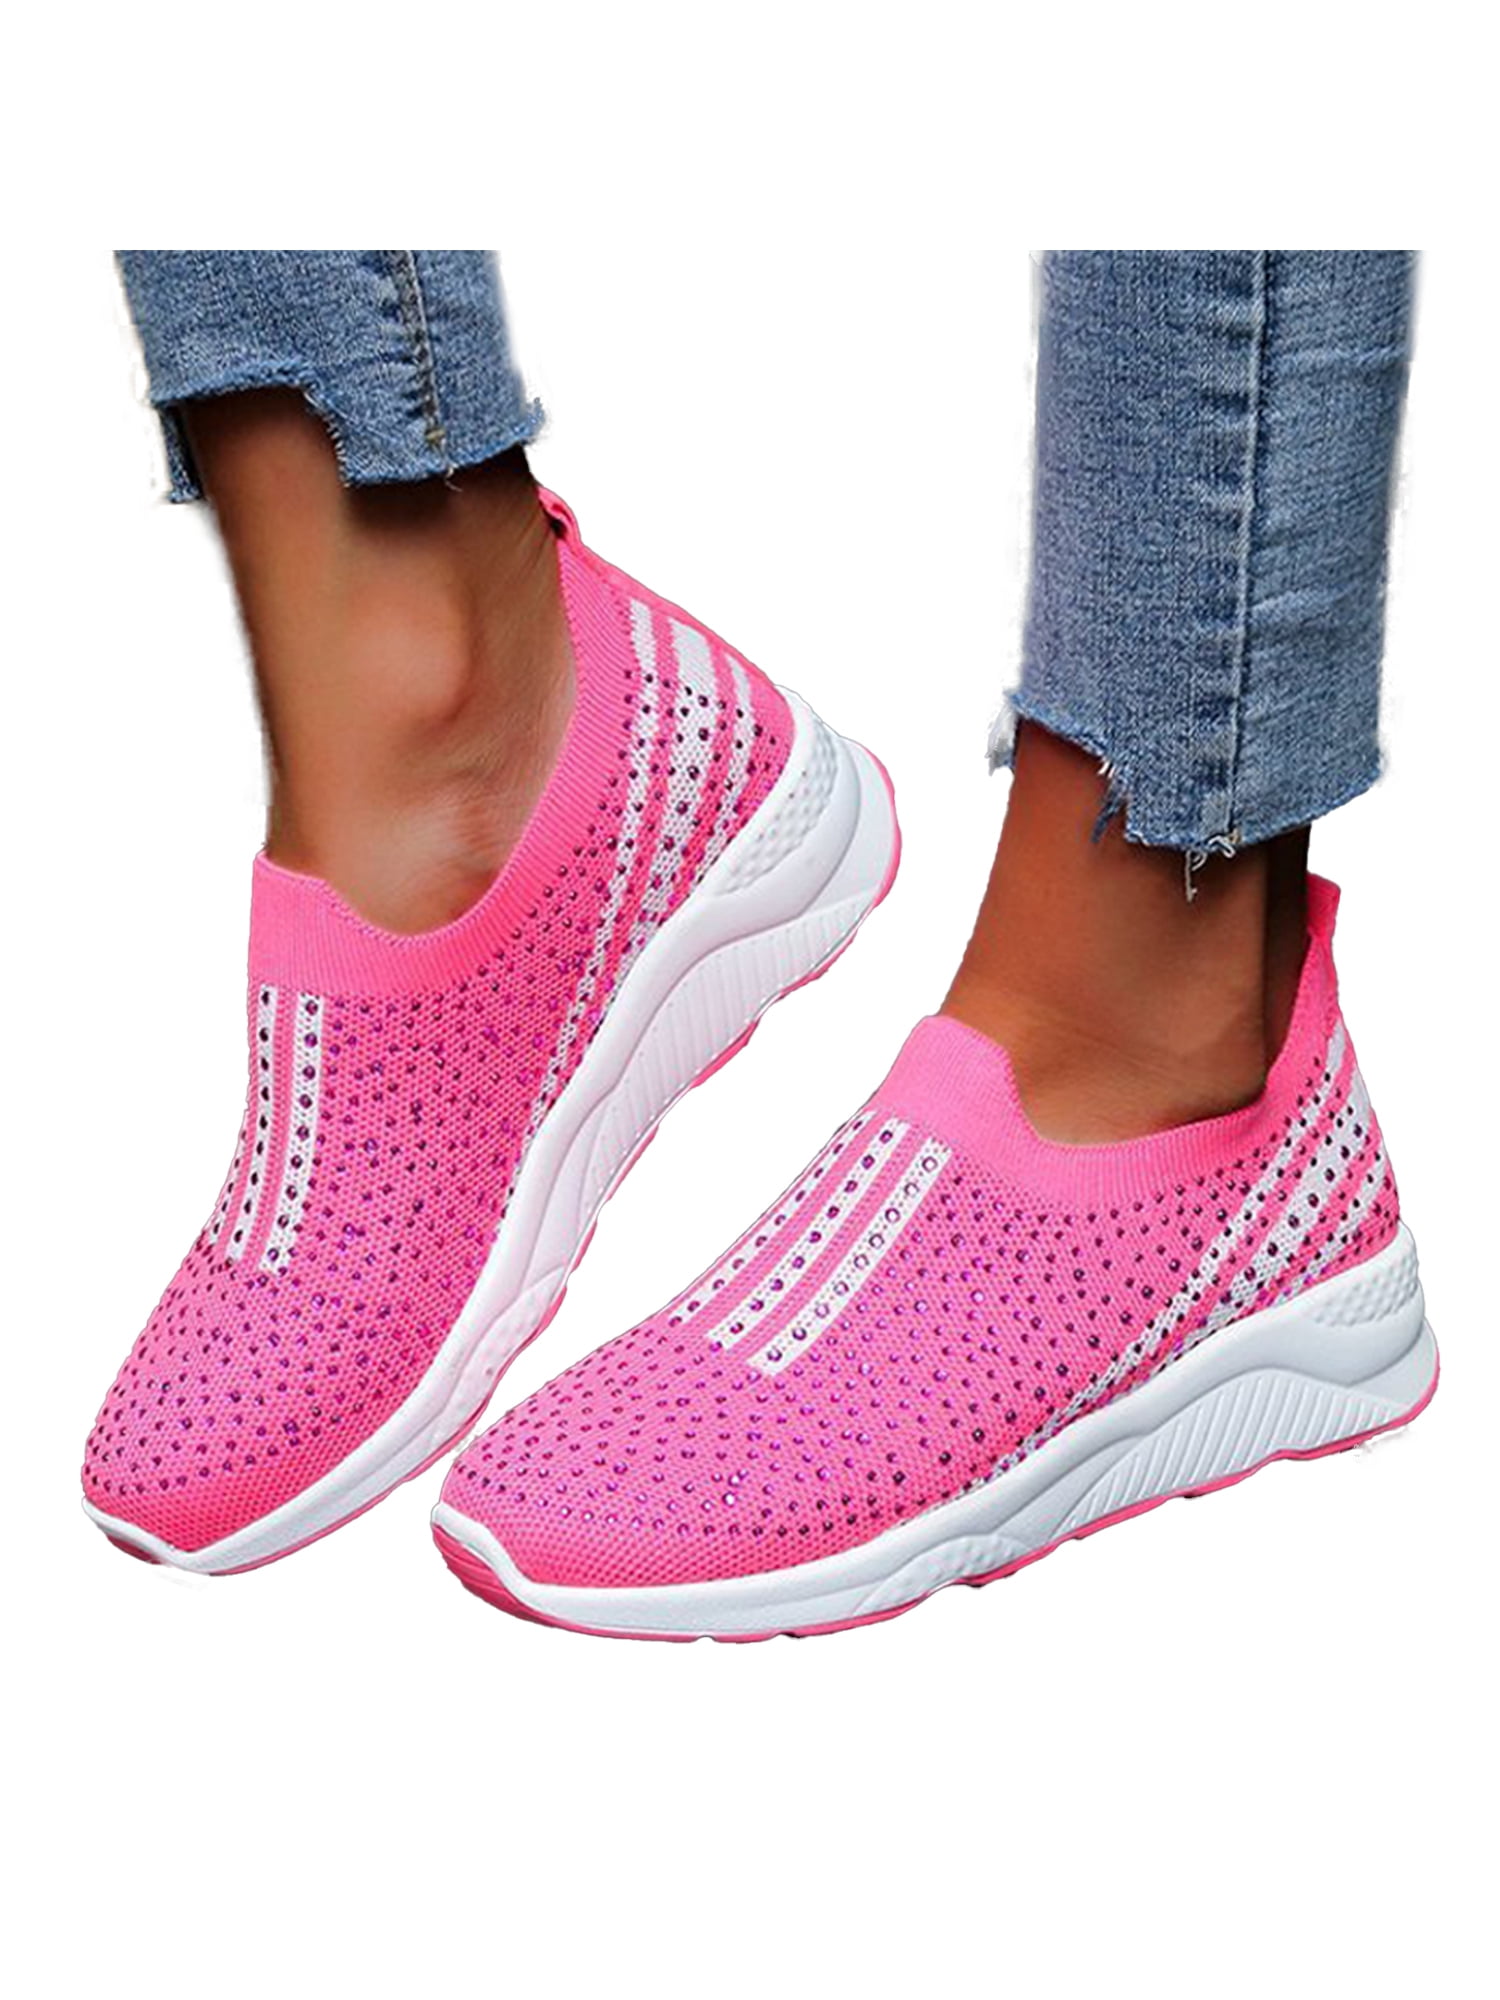 New Womens Casual Sneakers Flat Slip On Diamante Zip Trainers Pumps Shoes Sizes